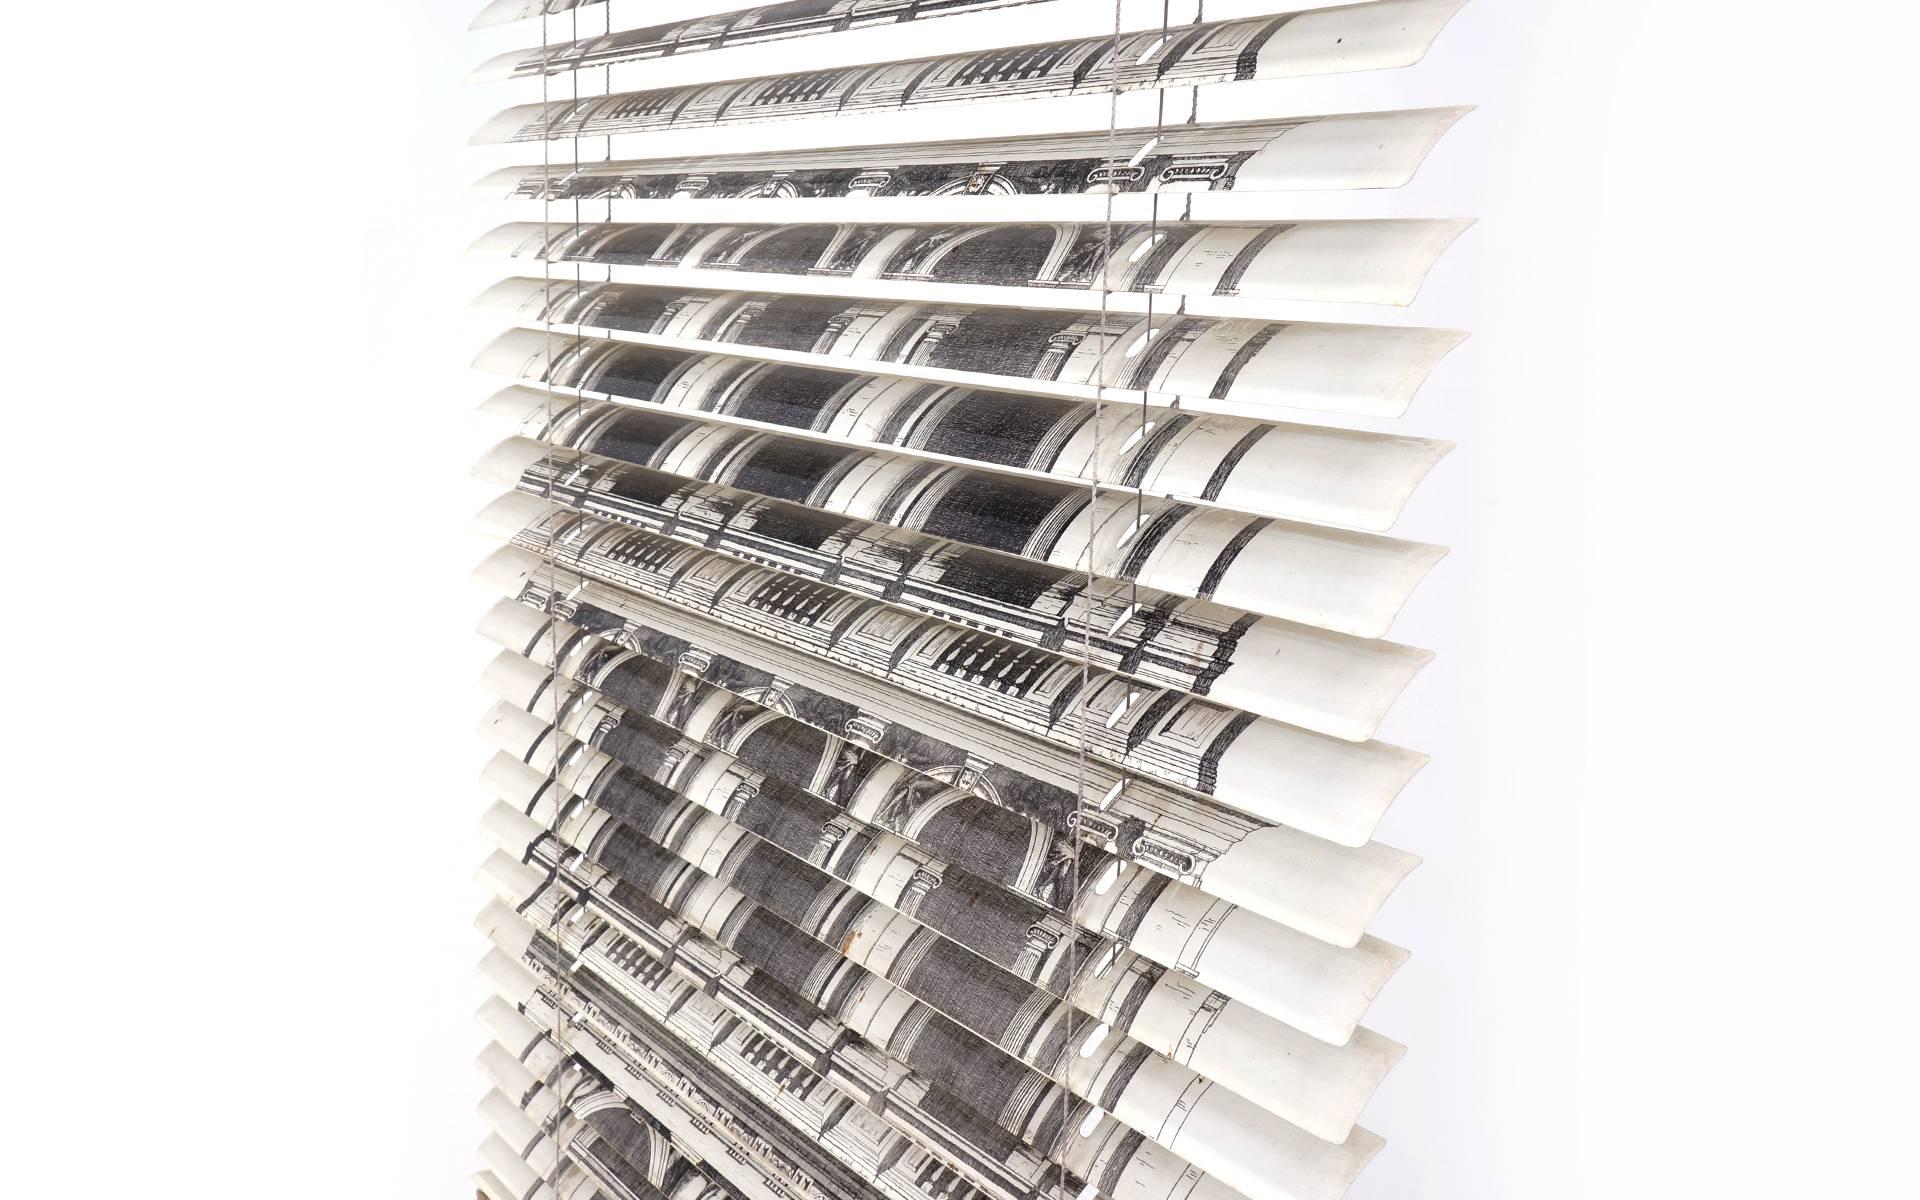 Very rare Procuratie Venetian blinds by Piero Fornasetti, Italy, circa 1960, lithograph on aluminum, enameled steel.
   